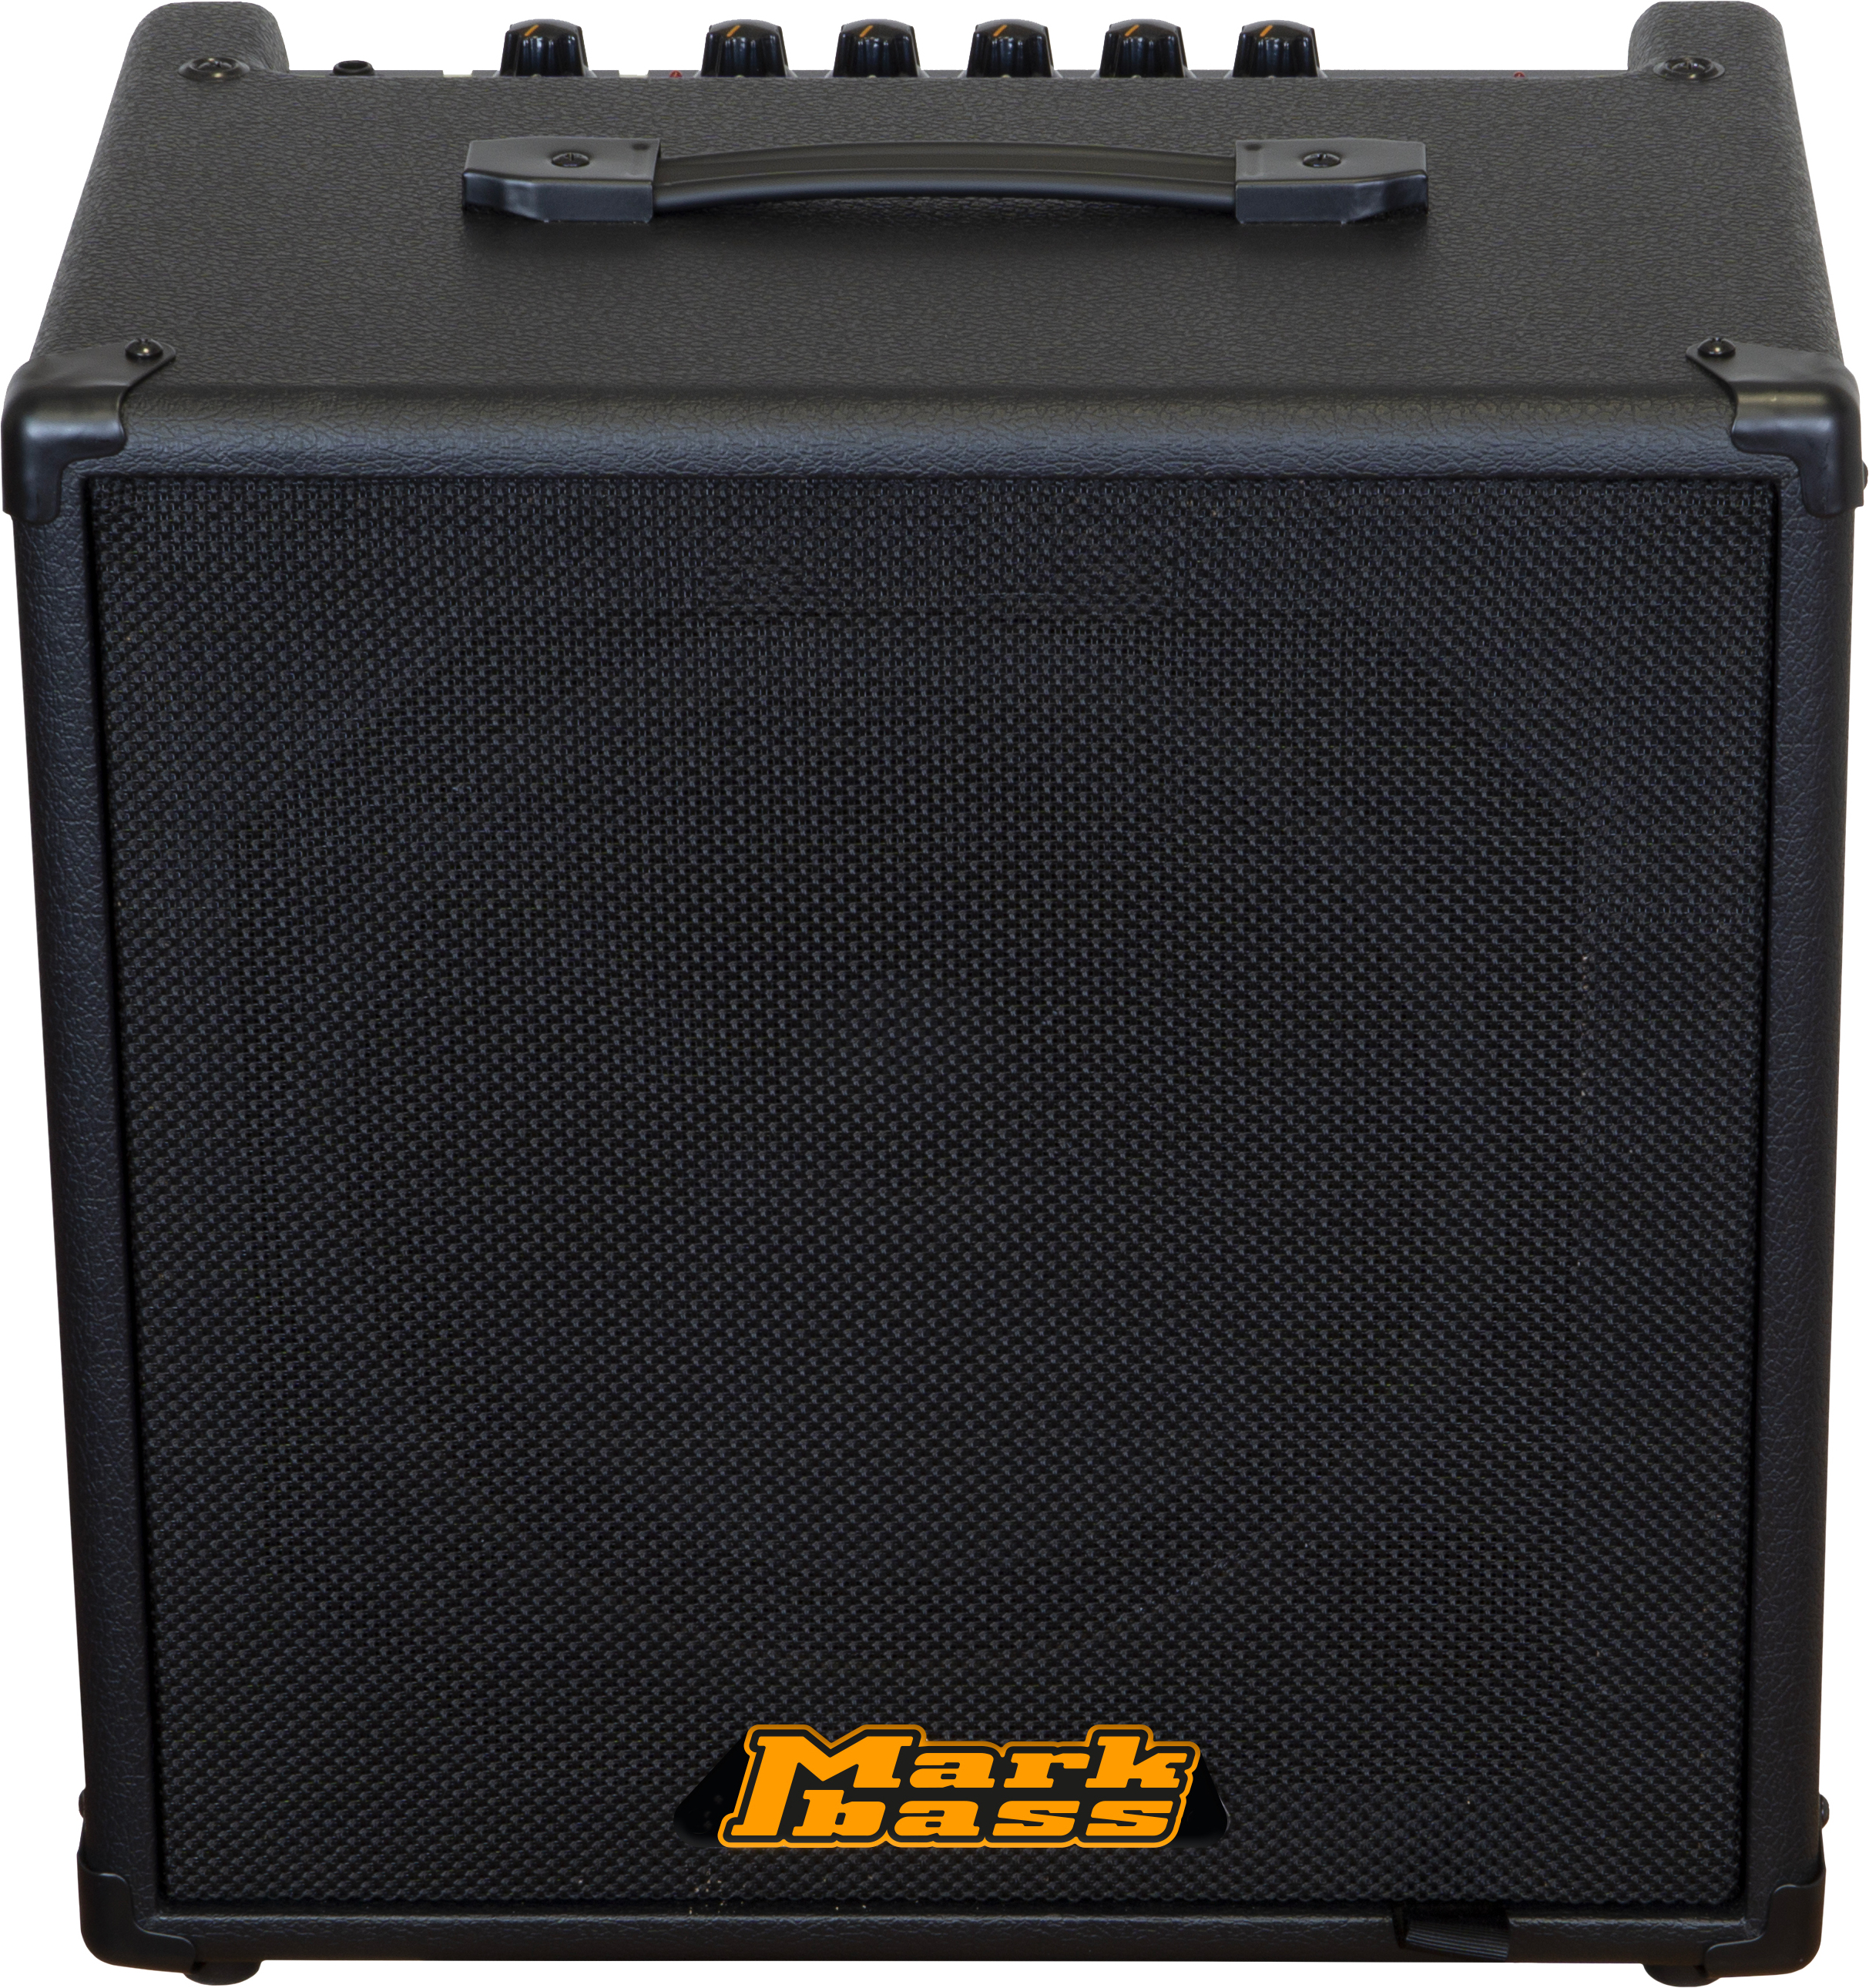 Markbass Cmb 101 Black Line Combo 40w 1x10 - Bass combo amp - Main picture